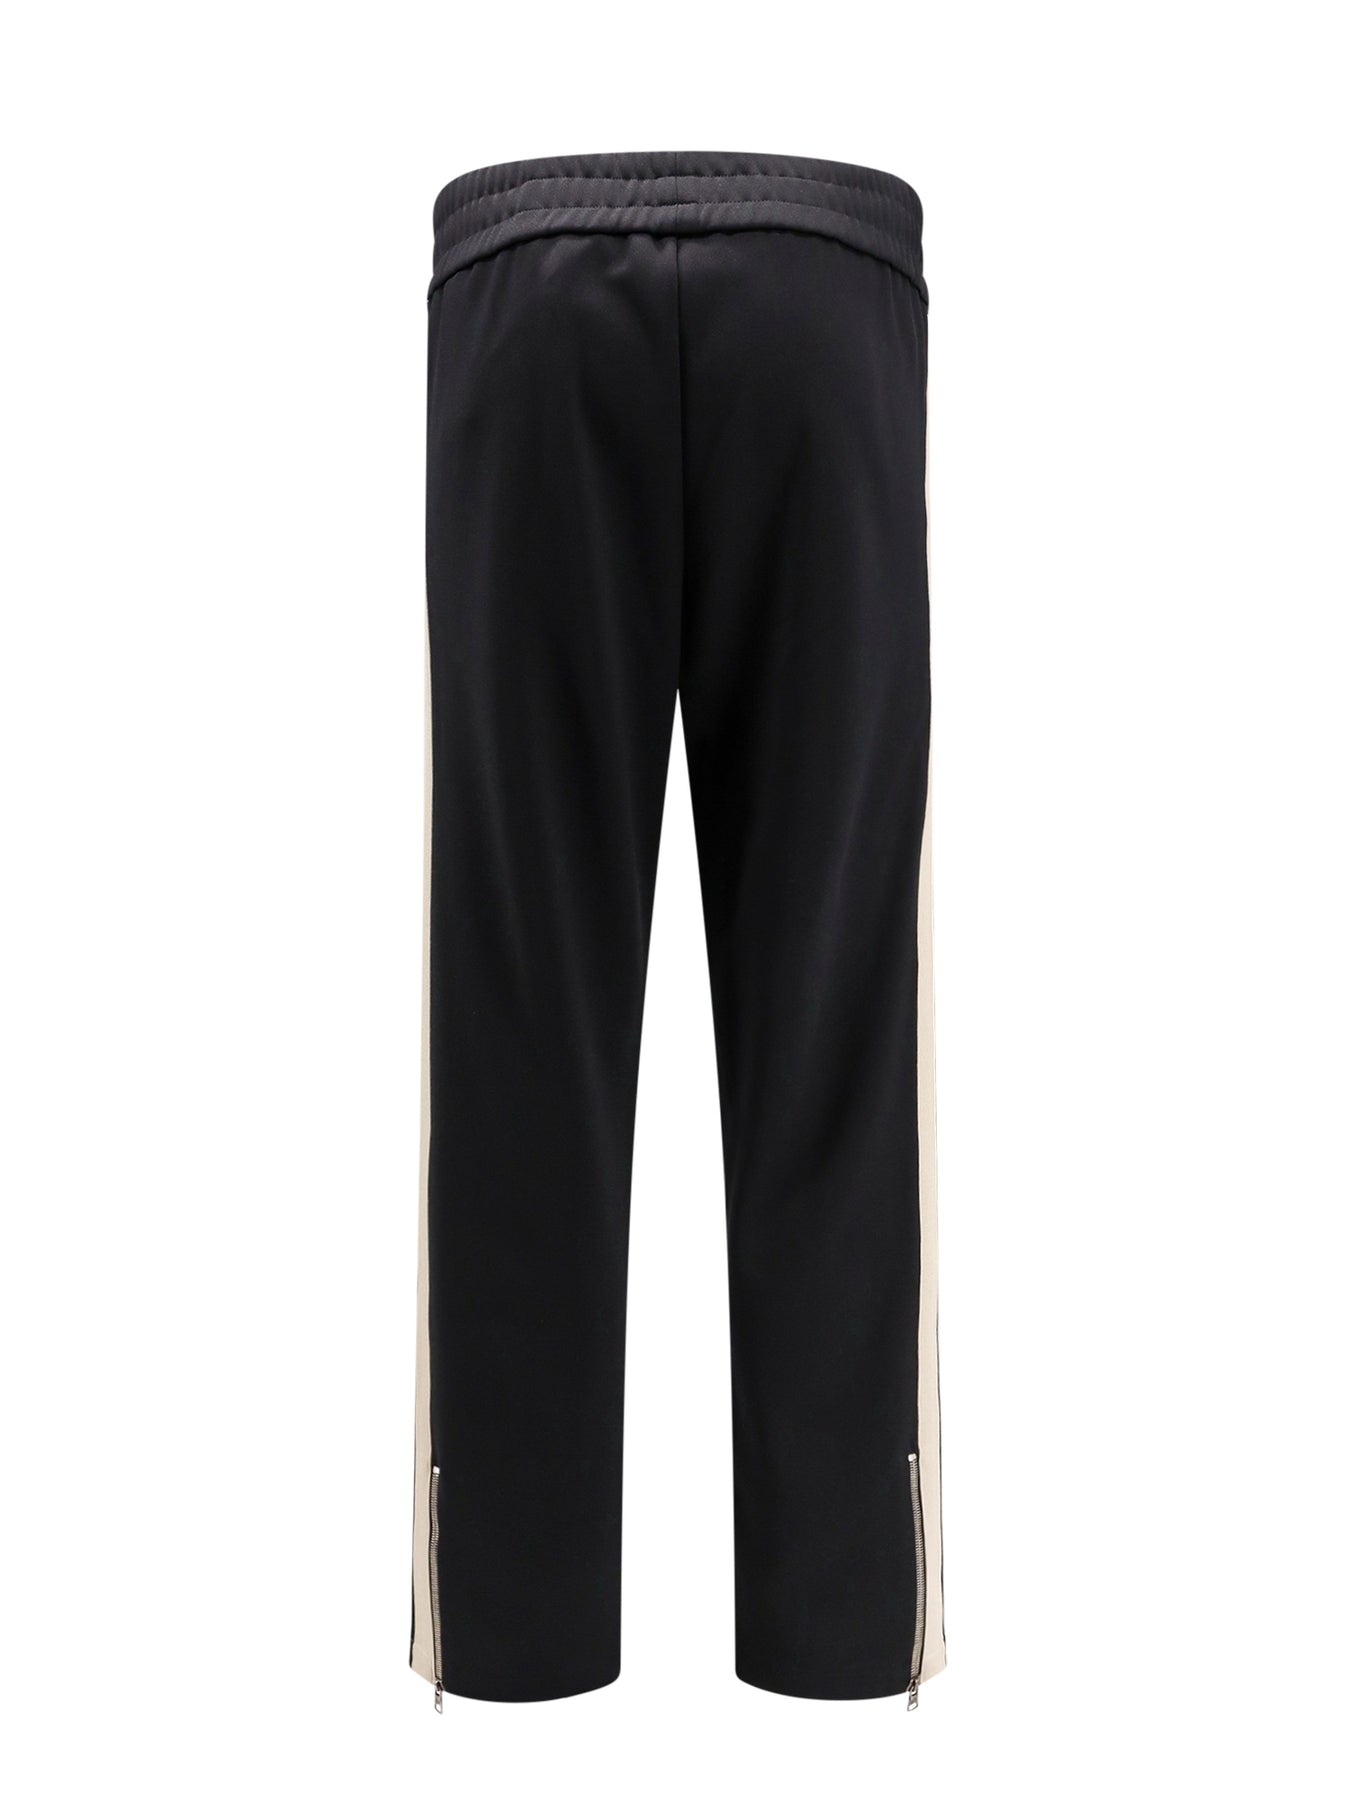 Trouser with embroidered monogram on the front - 2